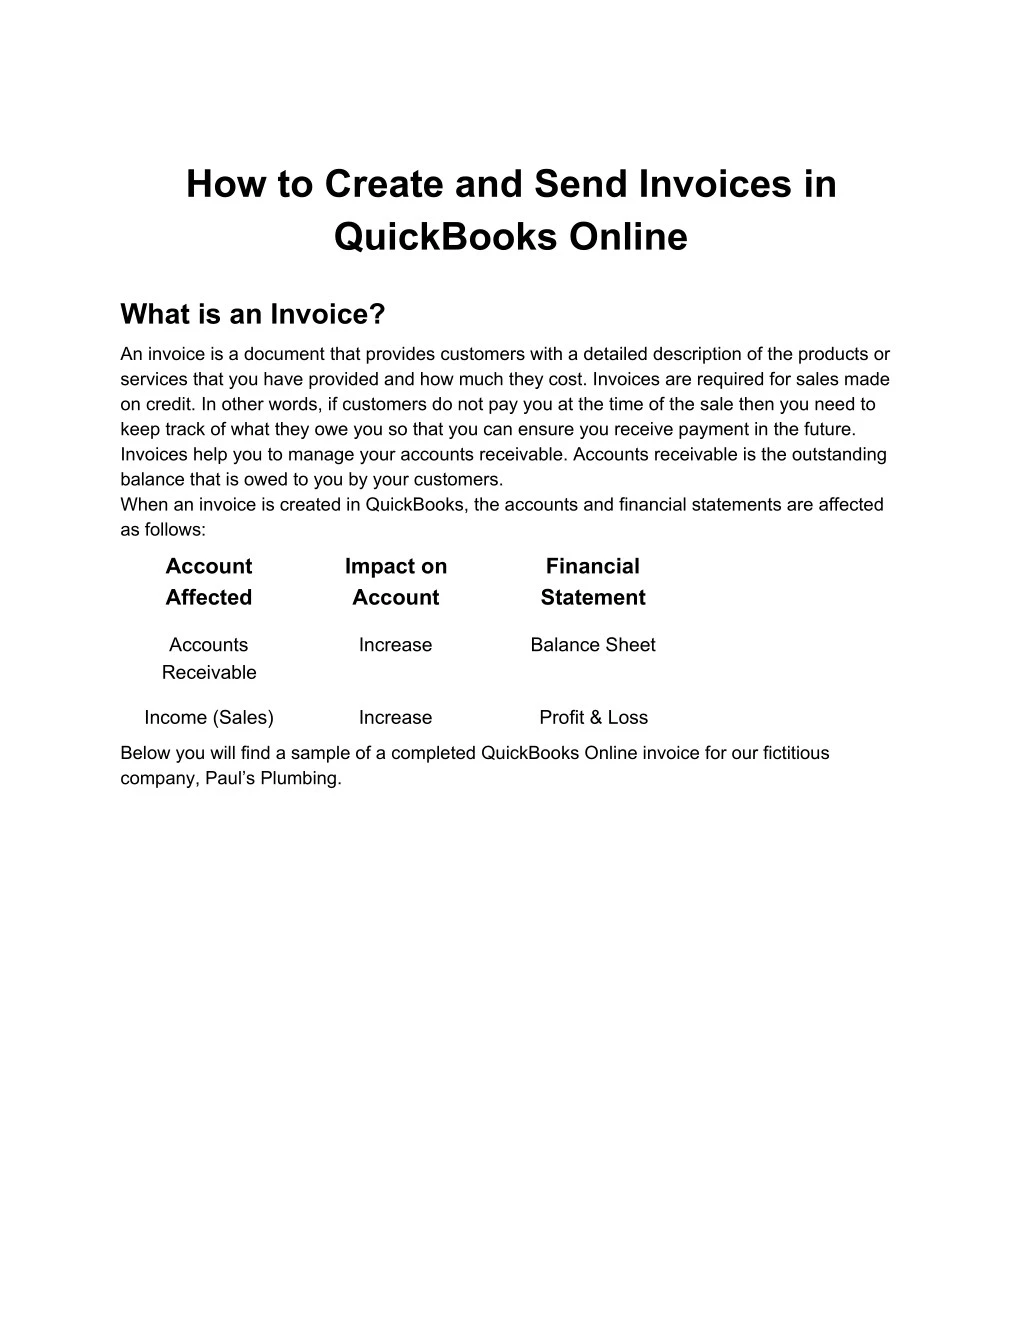 how to create and send invoices in quickbooks